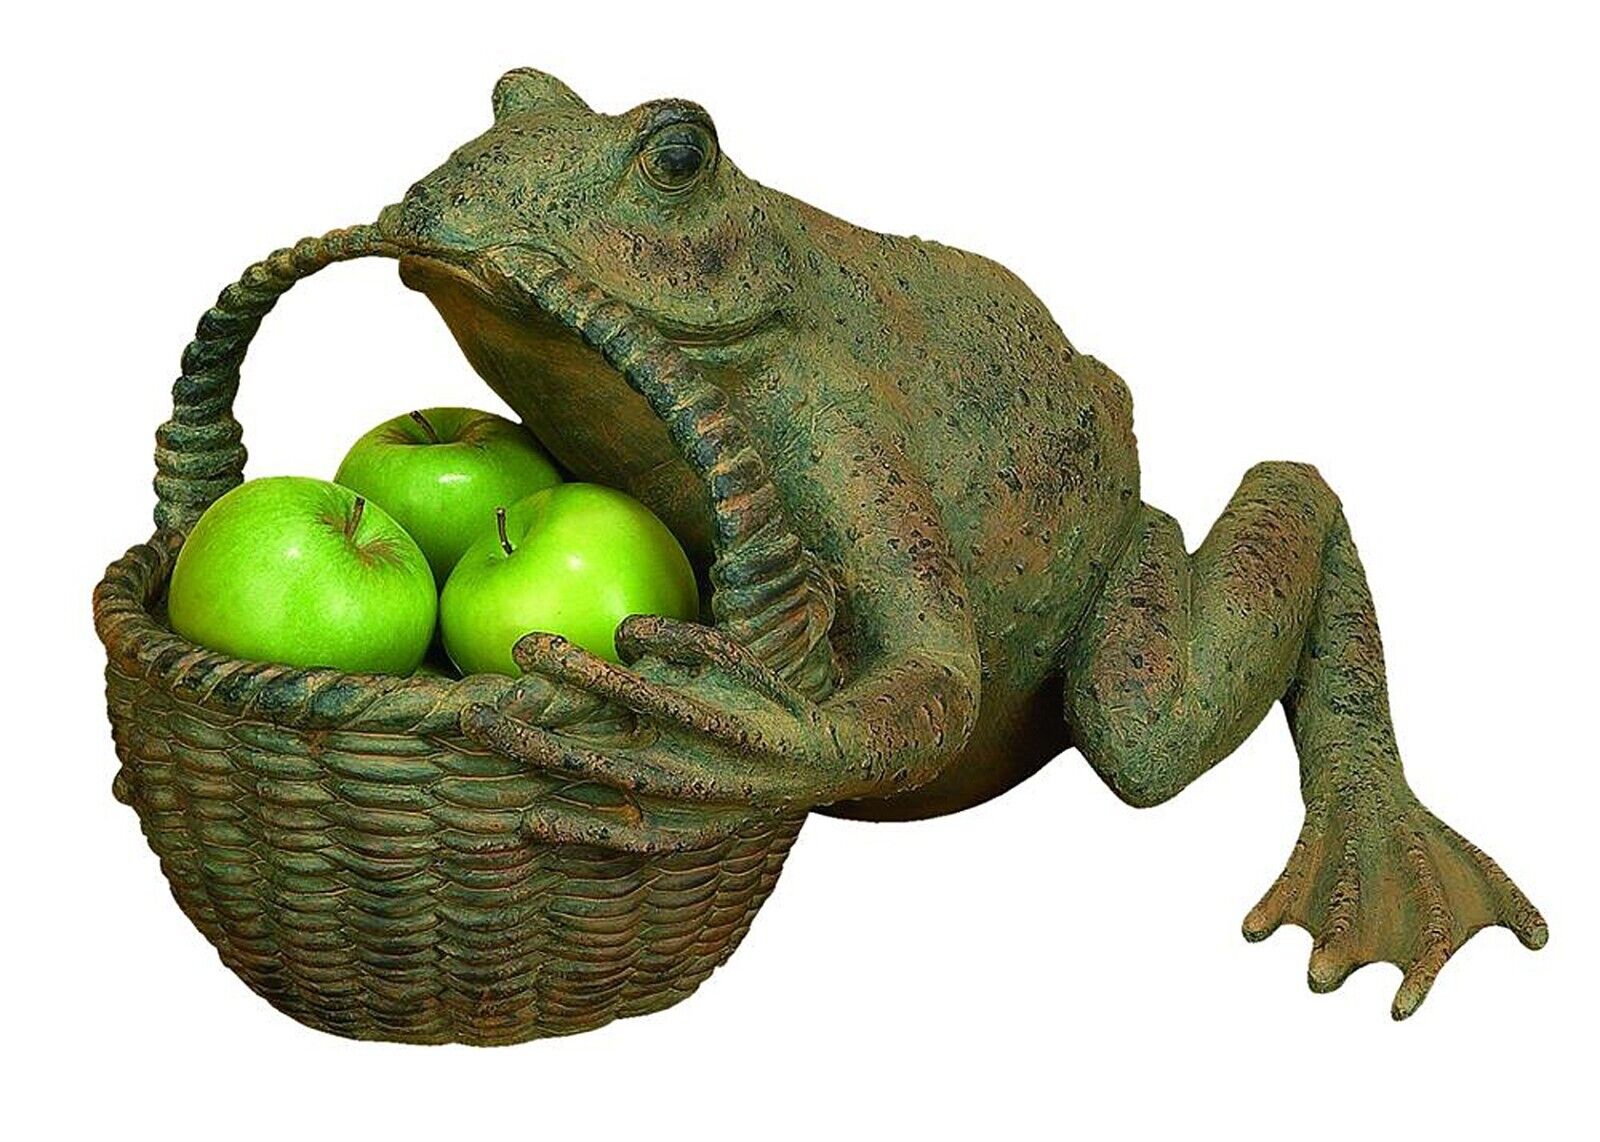 FANCIFUL FROG GARDEN PLANTER OR TABLE CENTERPIECE